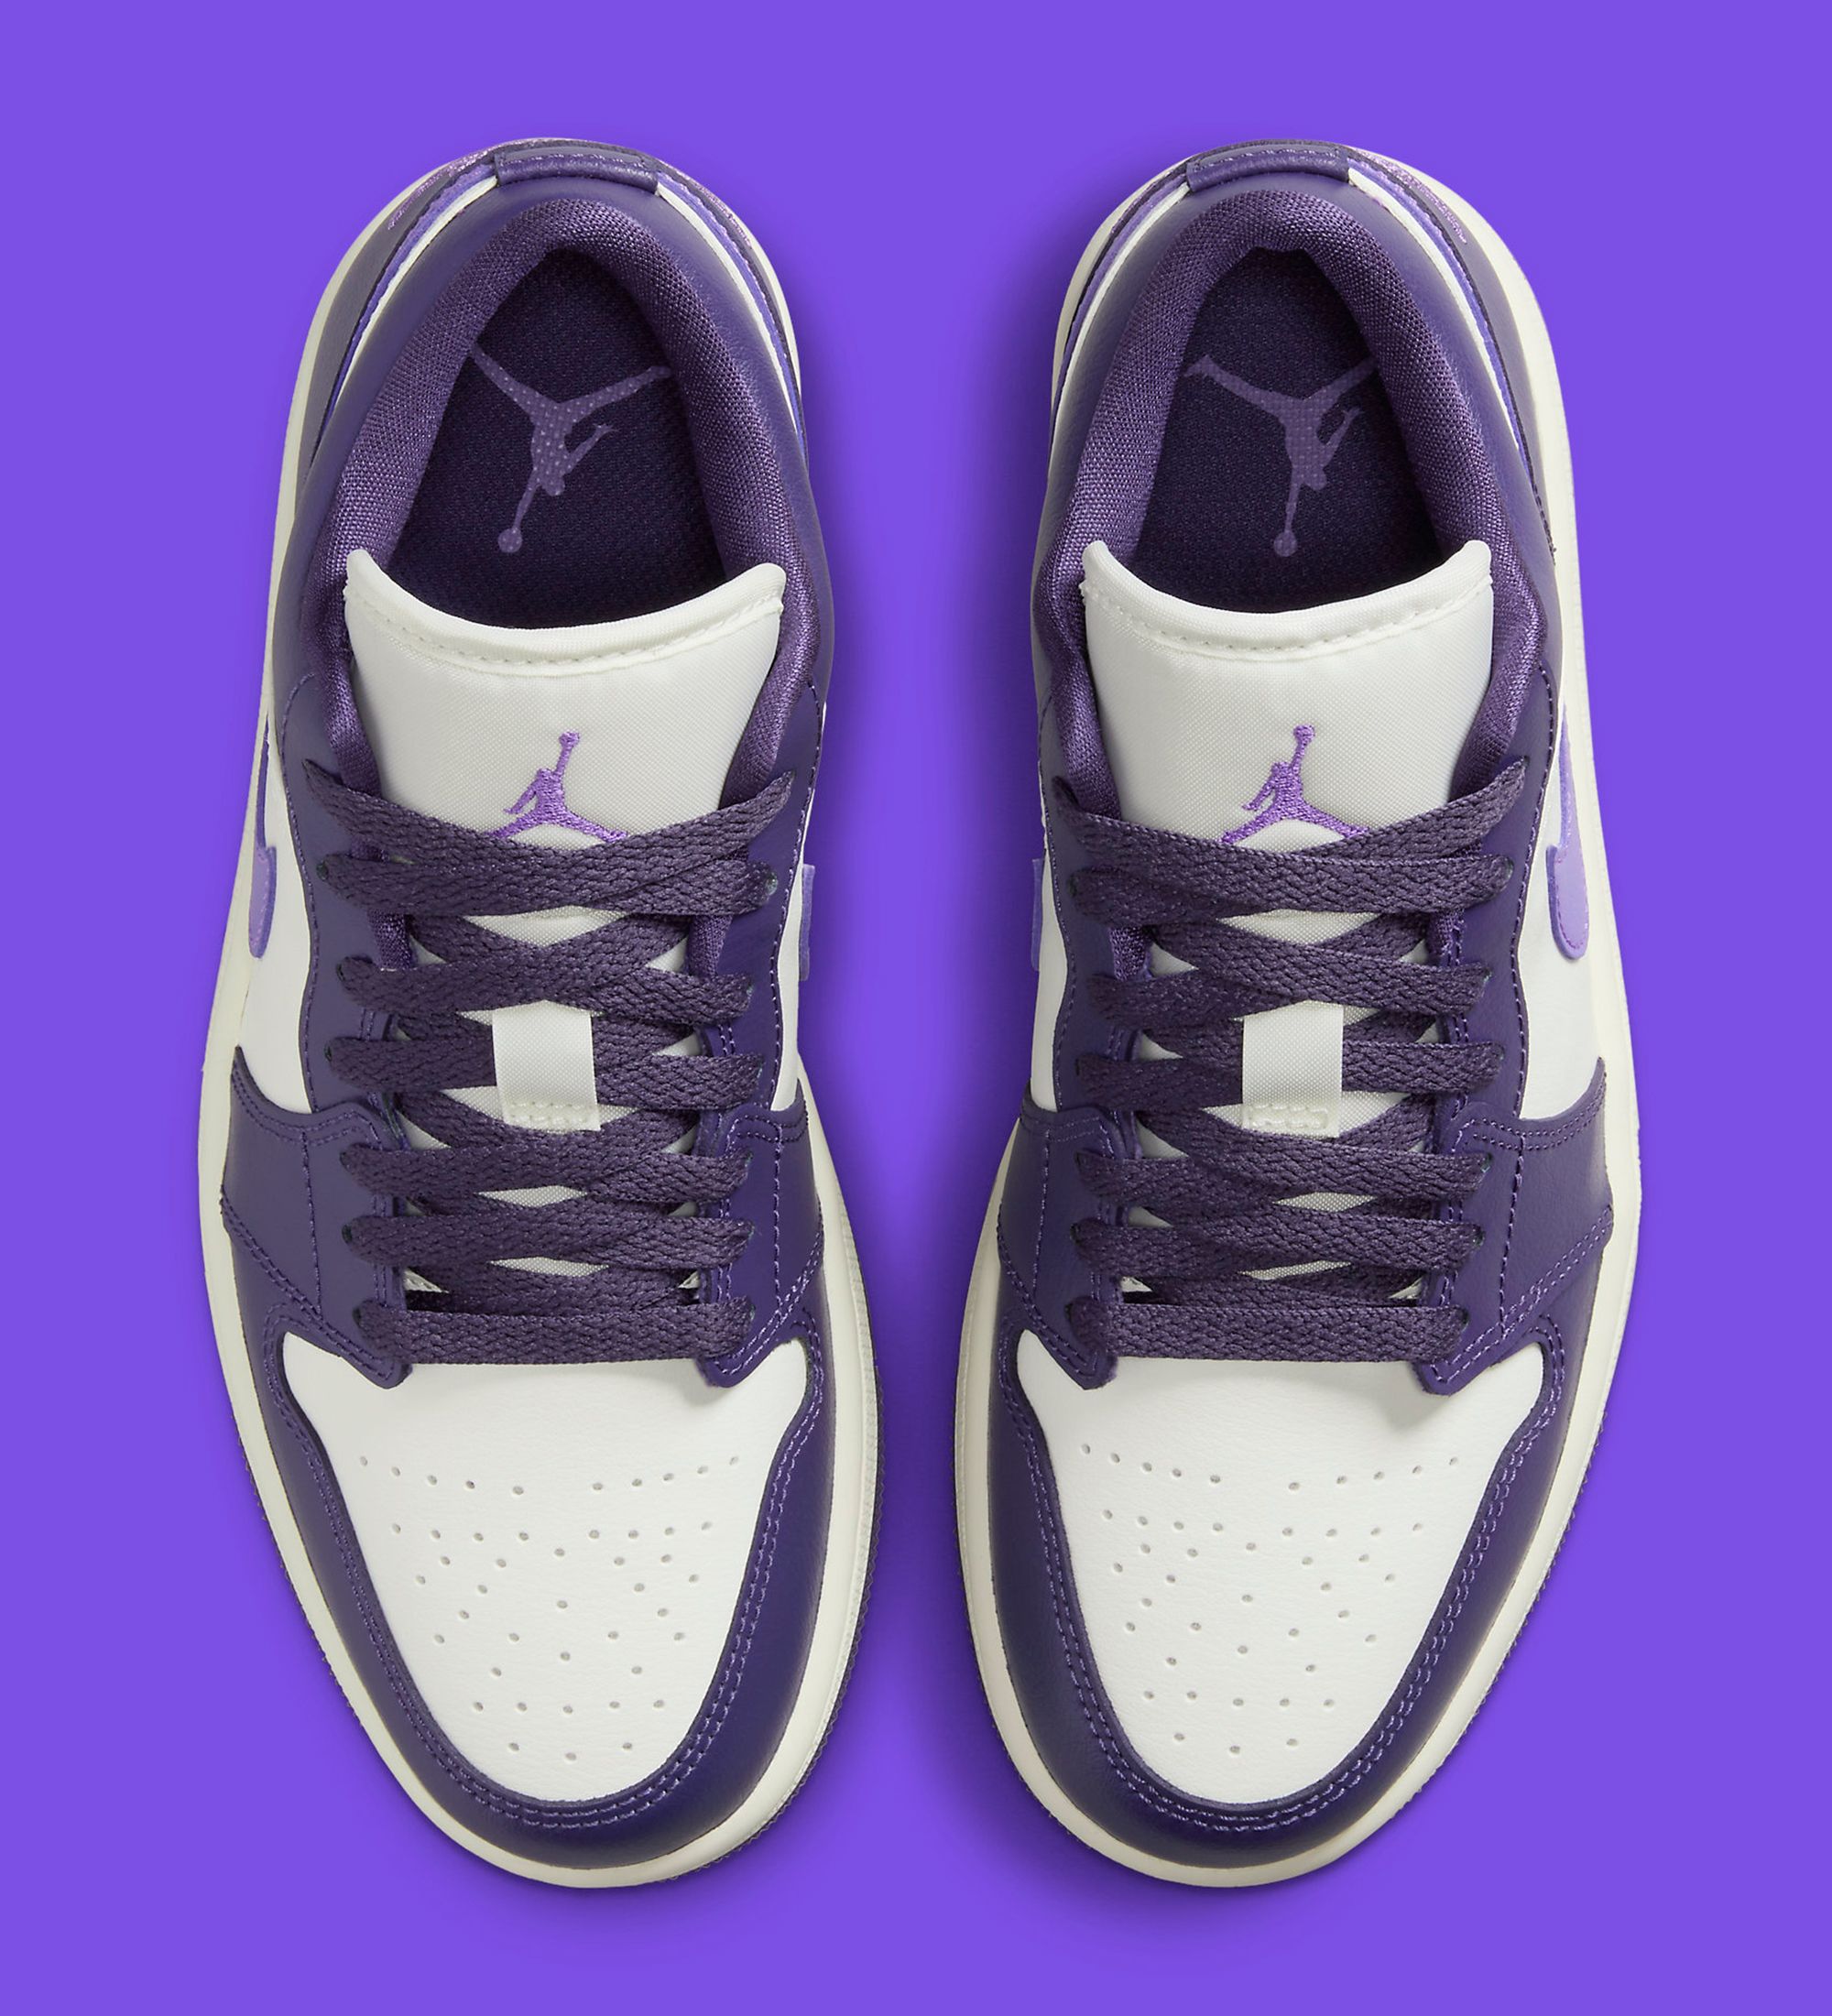 The Air Jordan 1 Low is Available Now in Sail and Purple | House